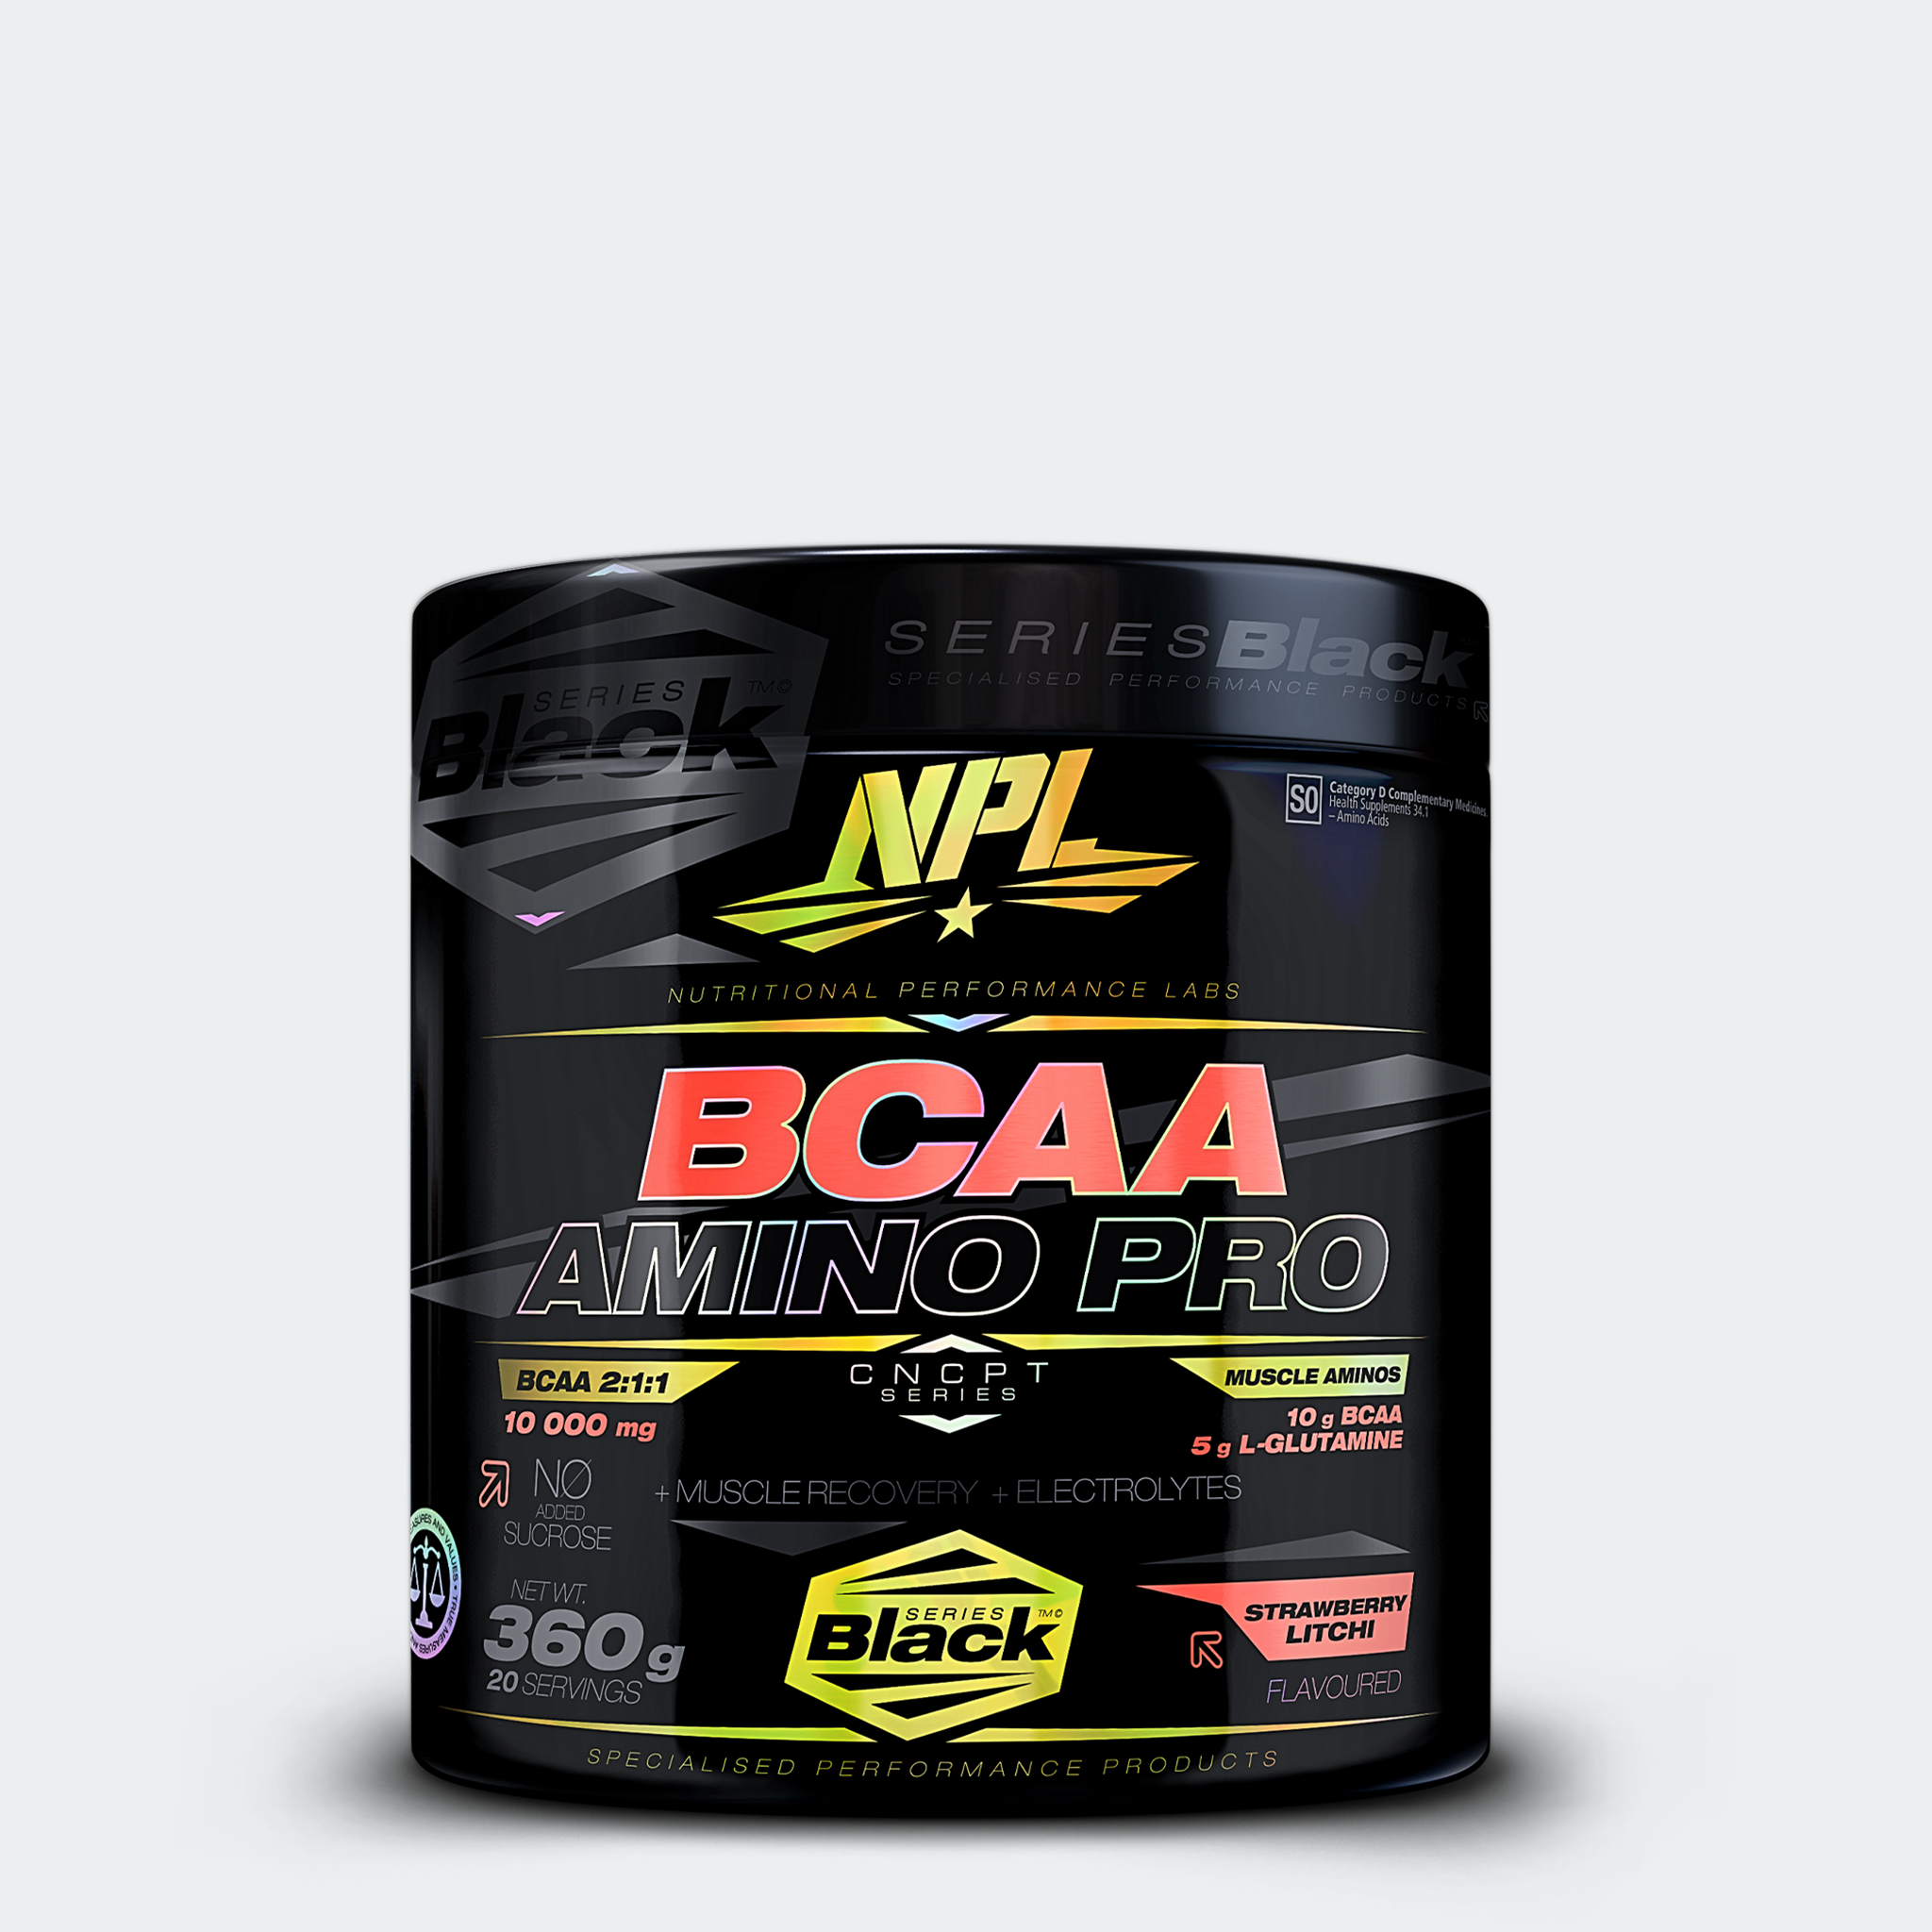 NPL BCAA Amino Pro with L-Glutamine for improved recovery and lean muscle growth - Strawberry litchi